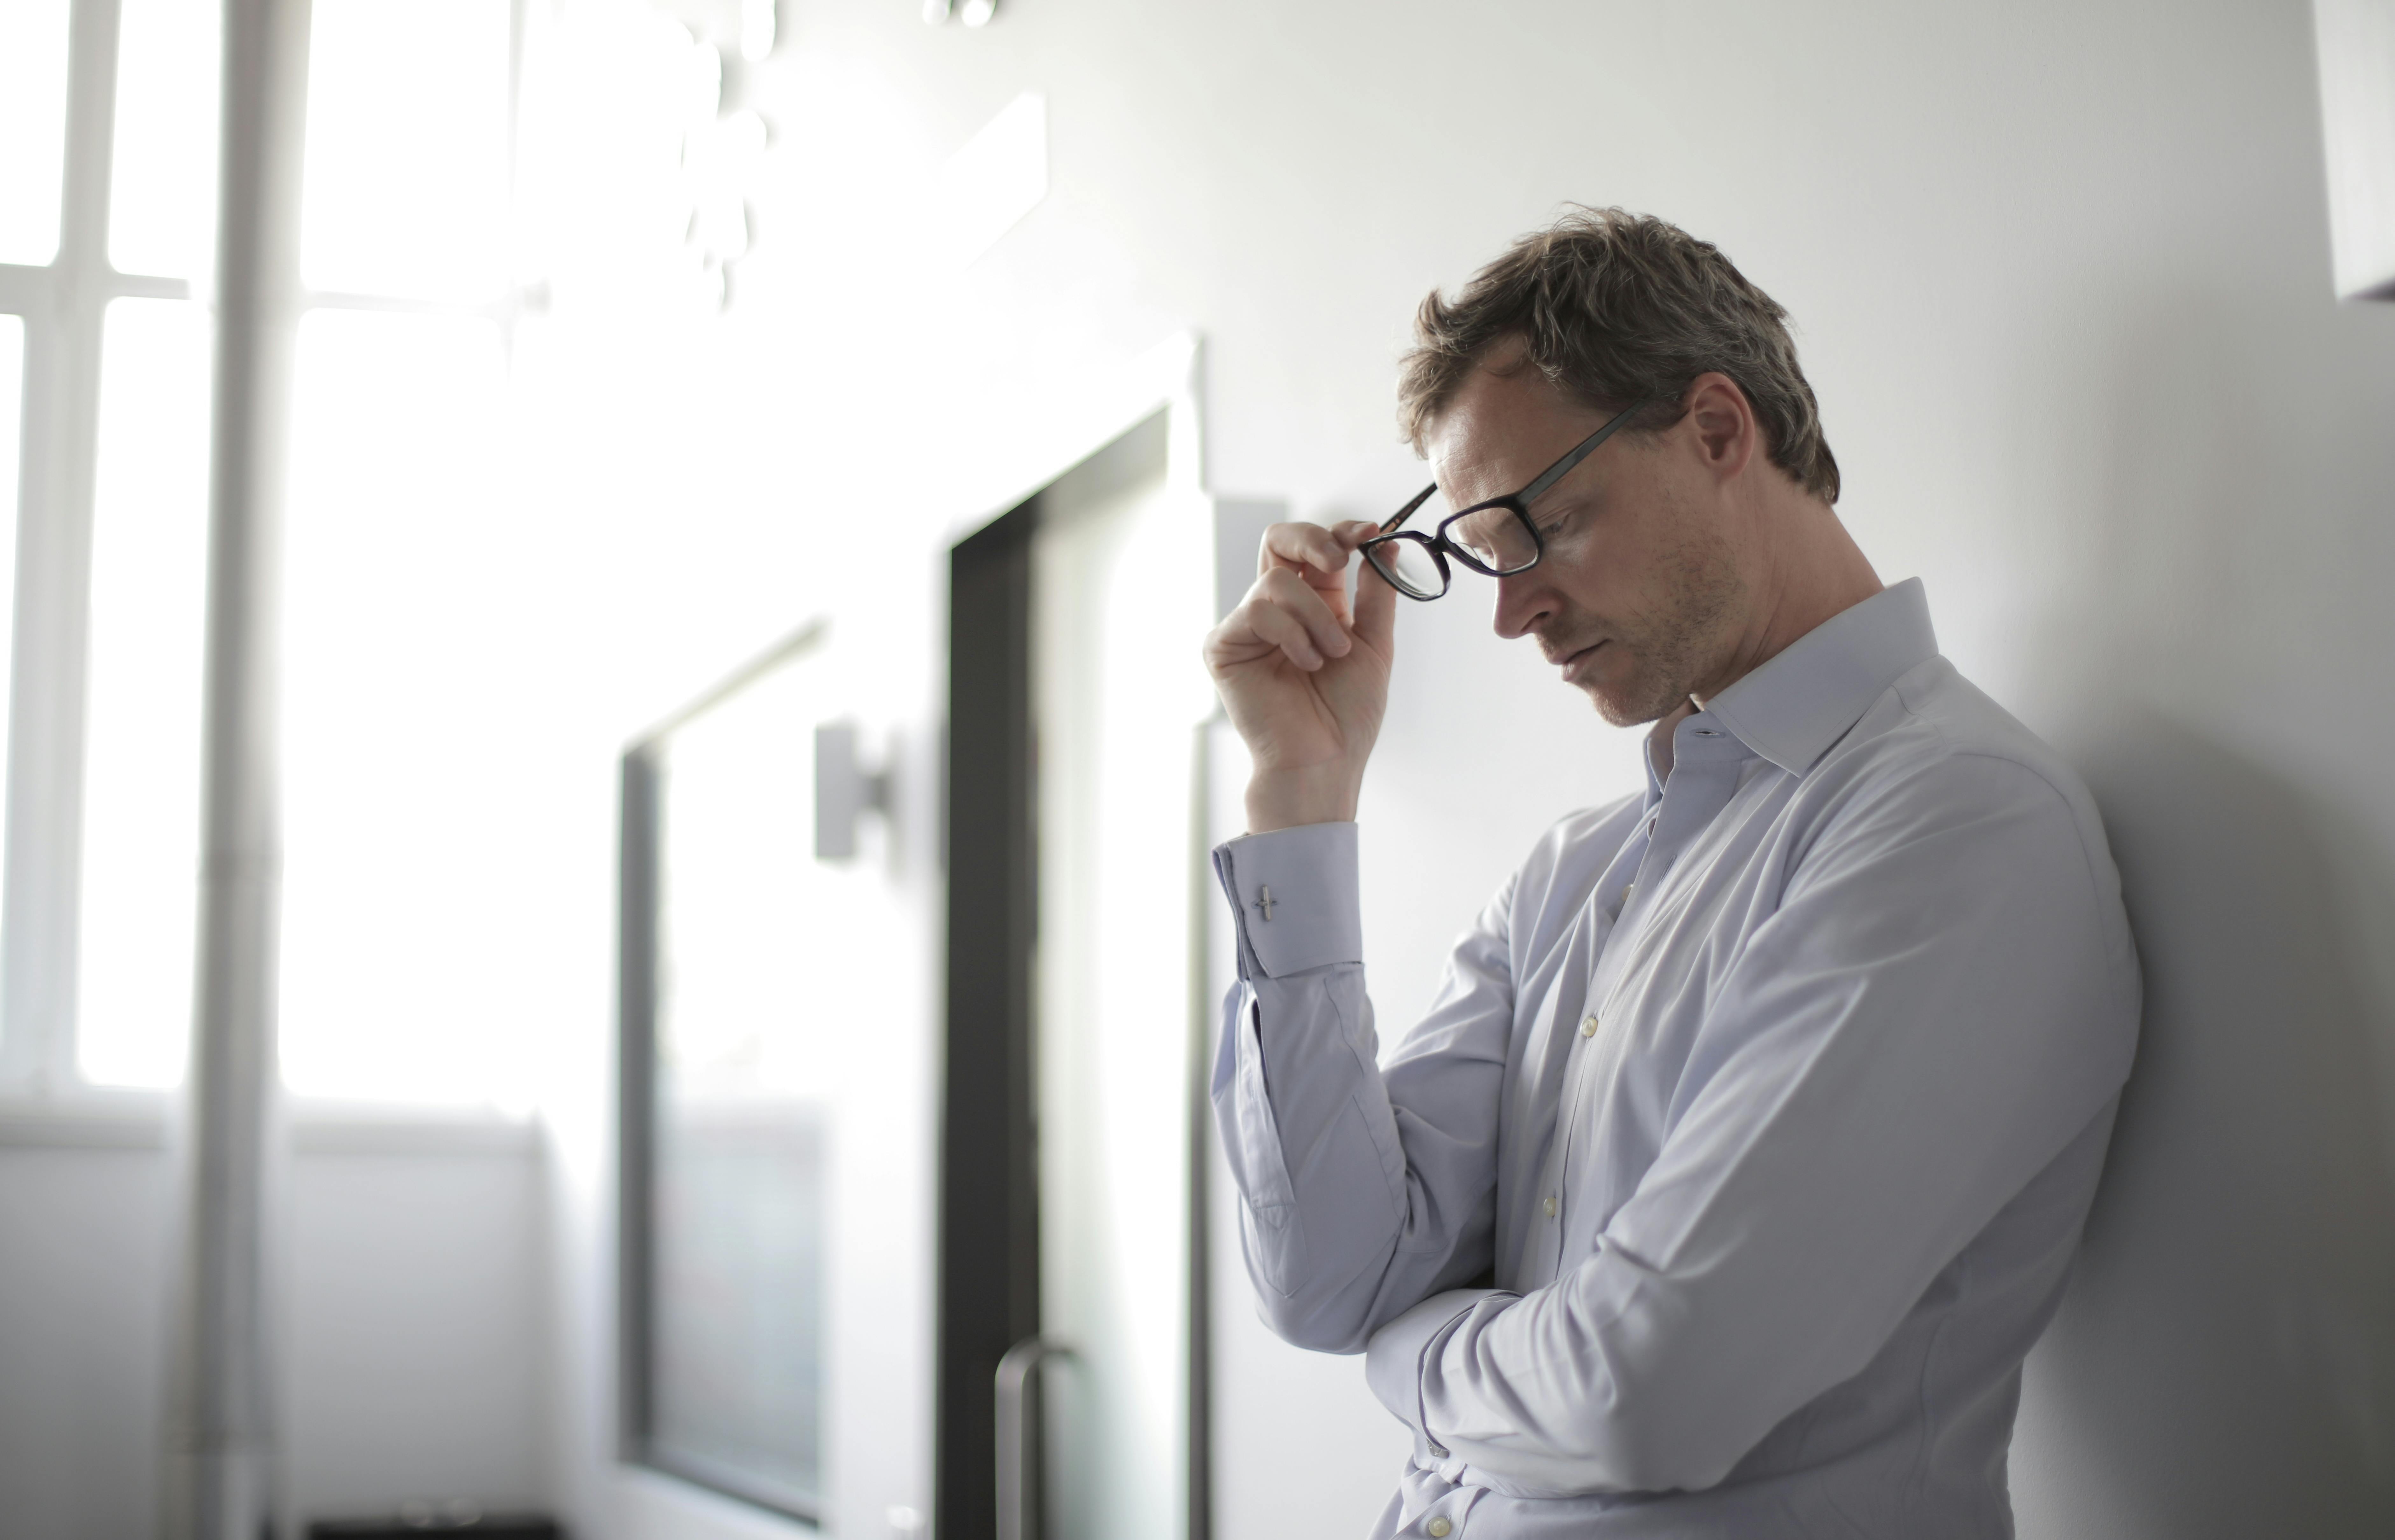 An upset man standing against a wall with his glasses partially off | Source: Pexels